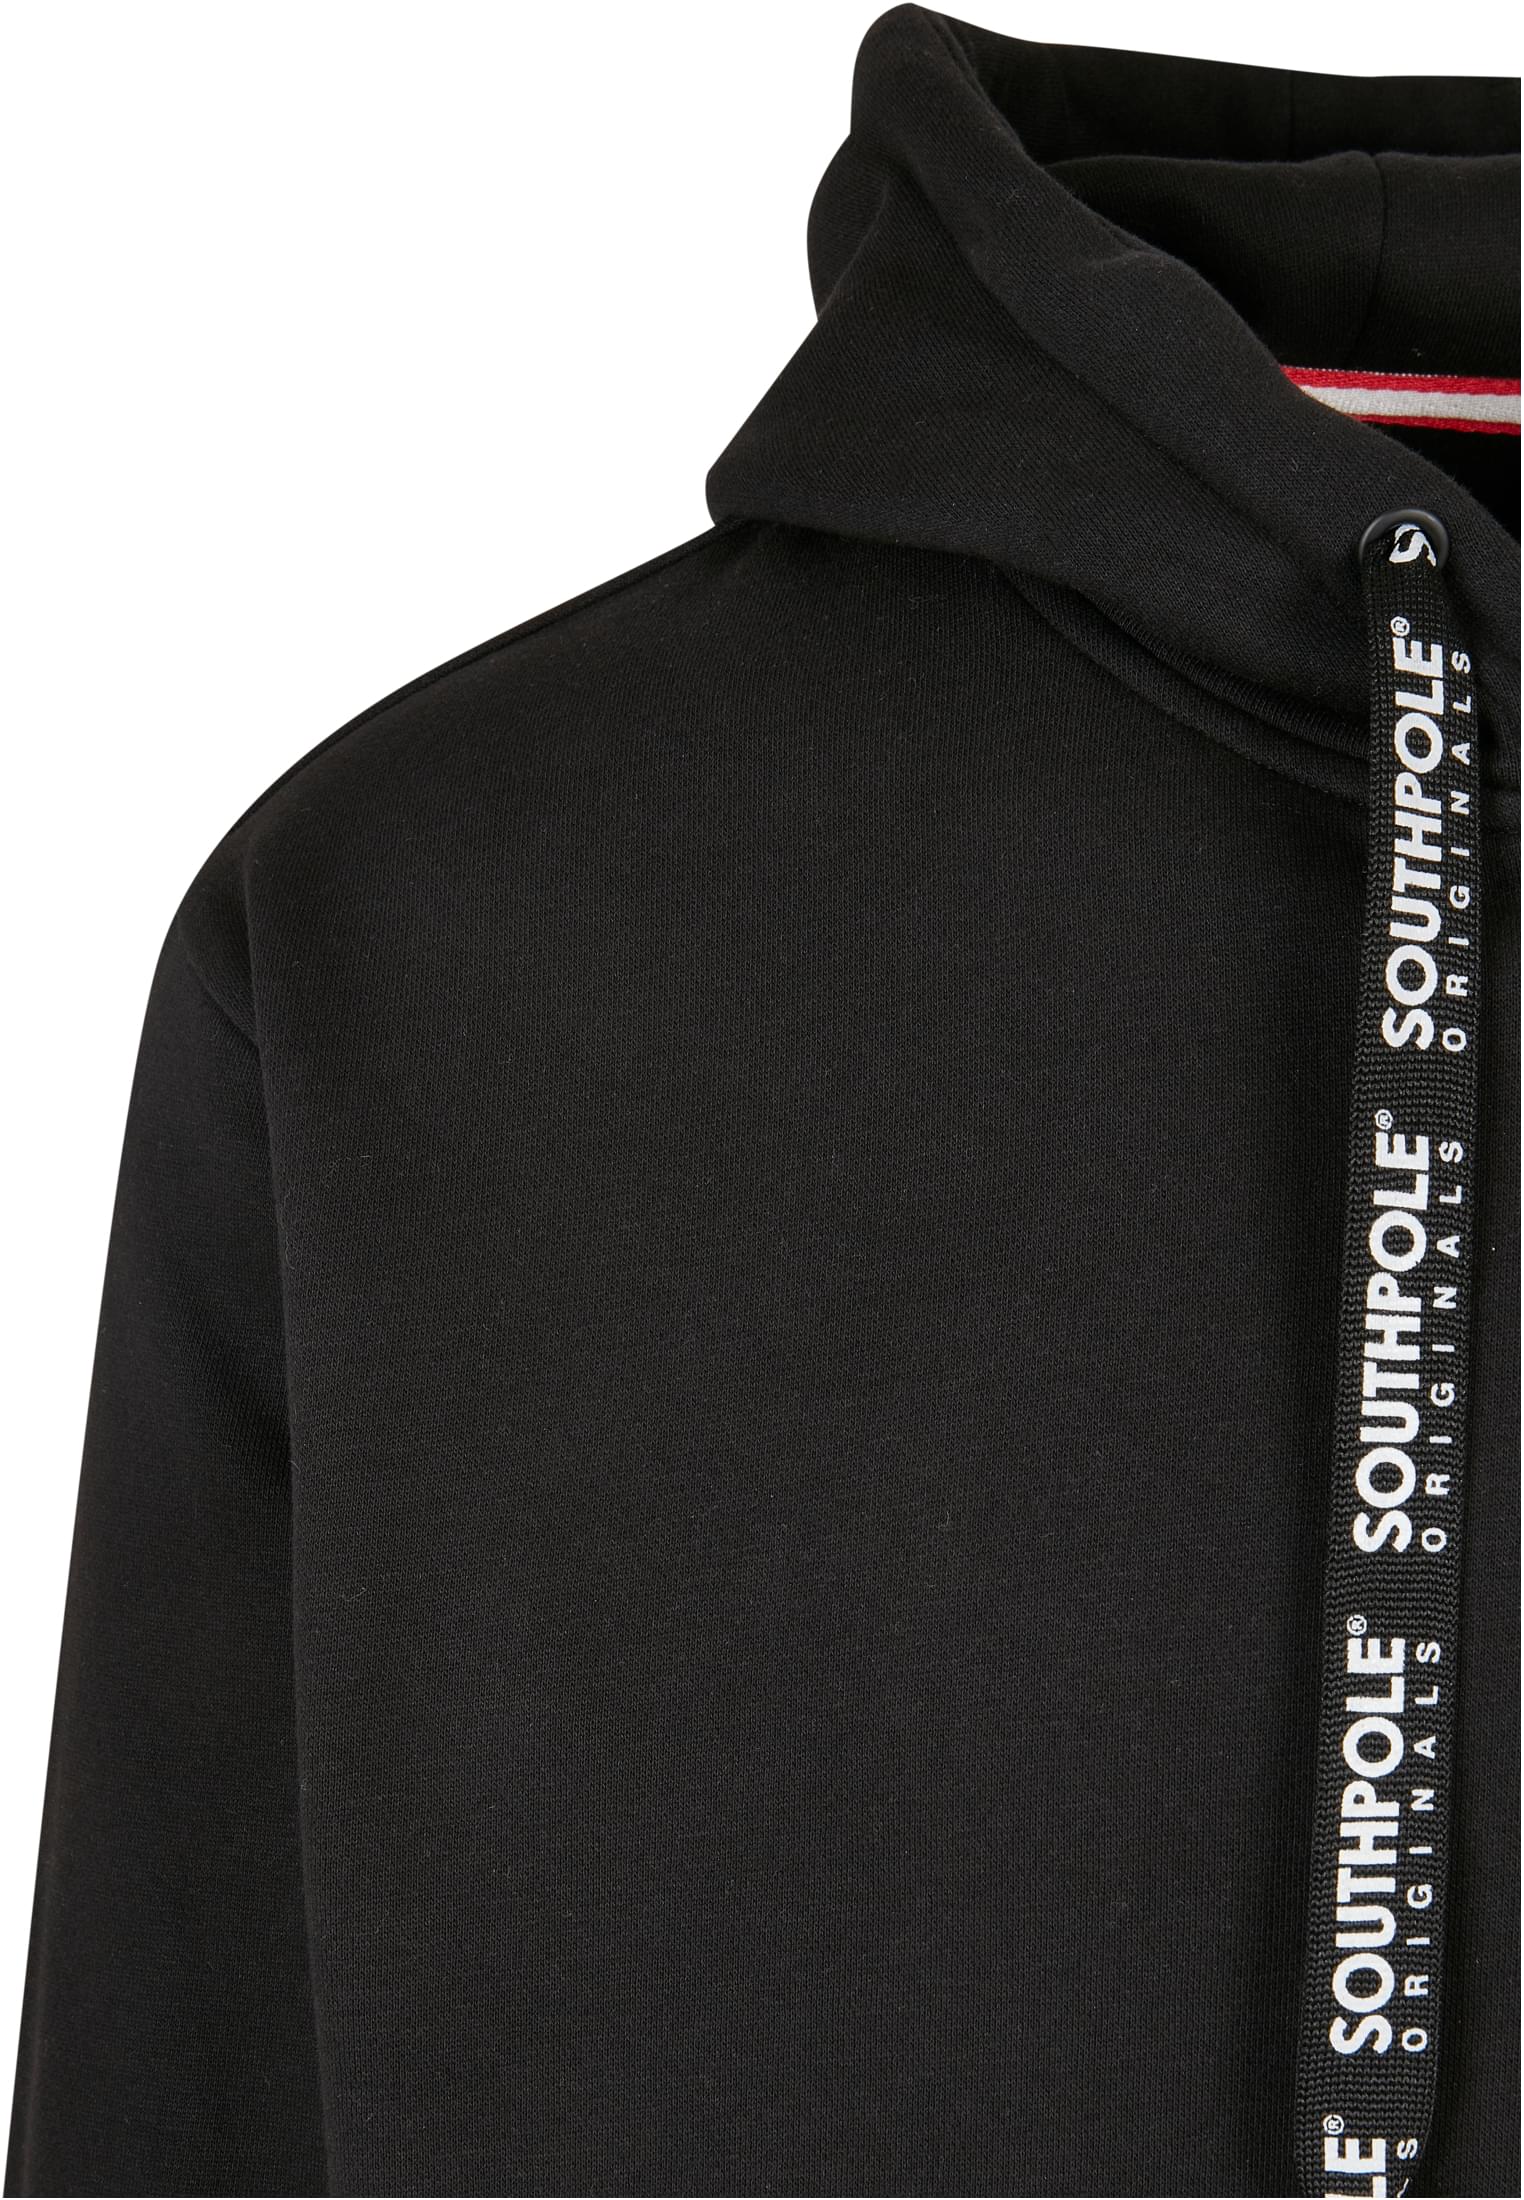 Southpole Southpole Old School Spray Can Hoody in Farbe black